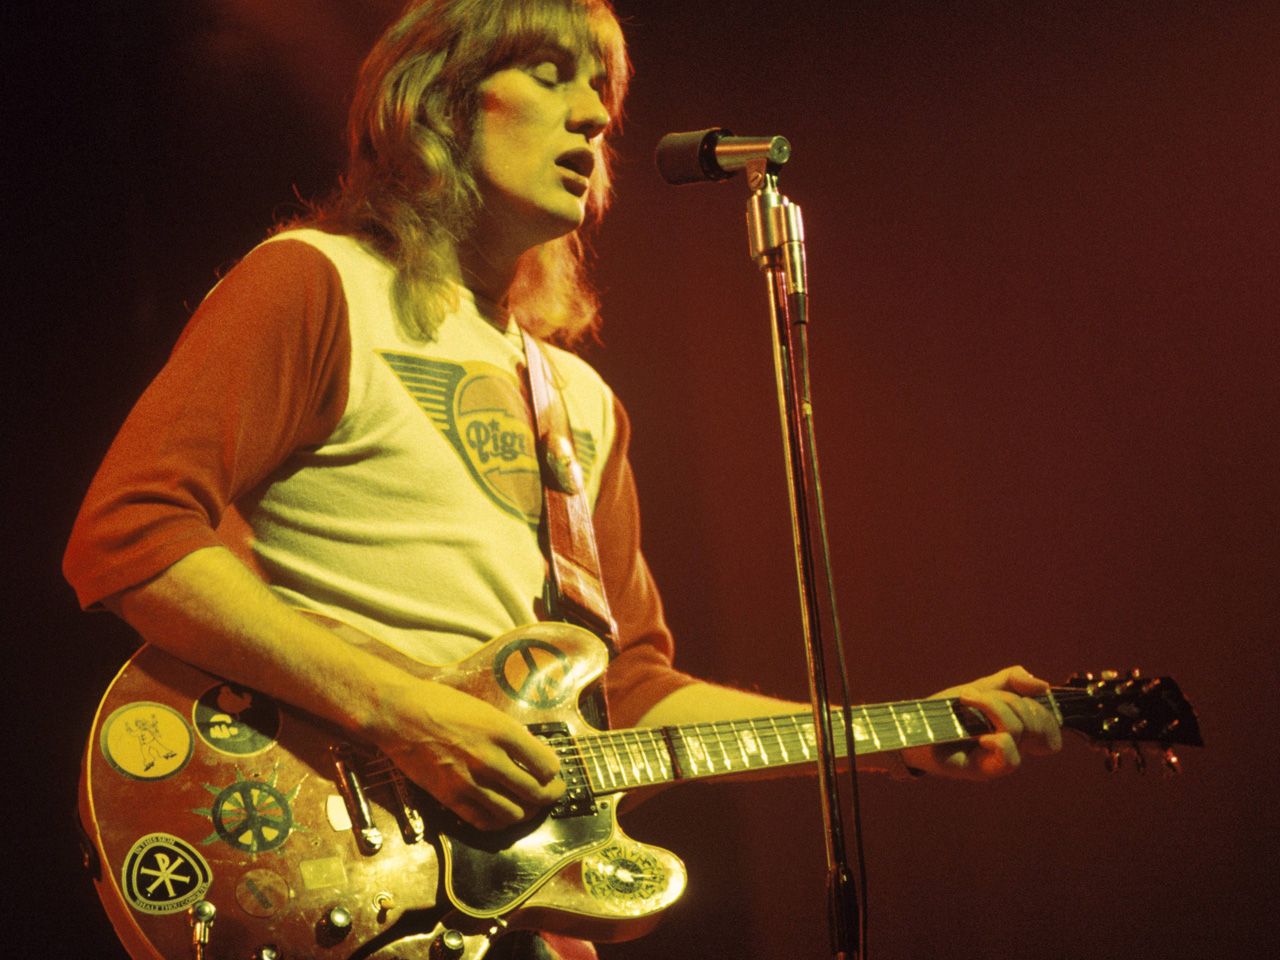 Ten Years After singer Alvin Lee has died at 68